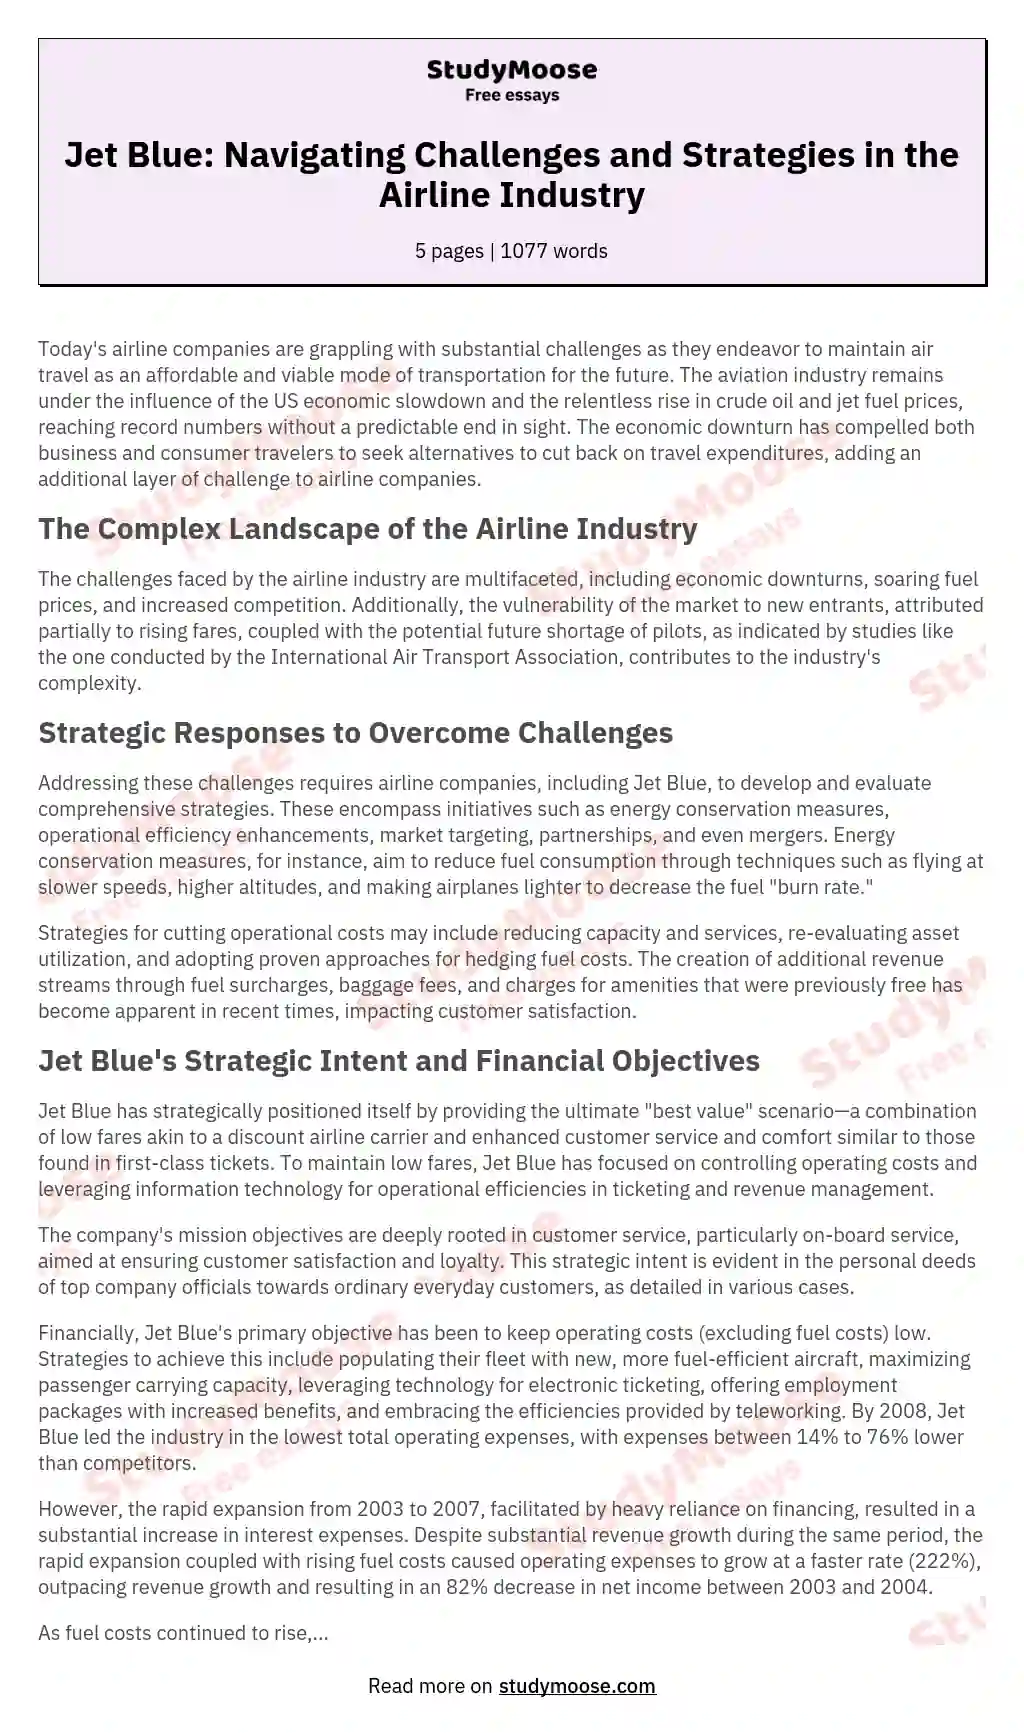 Jet Blue: Navigating Challenges and Strategies in the Airline Industry essay